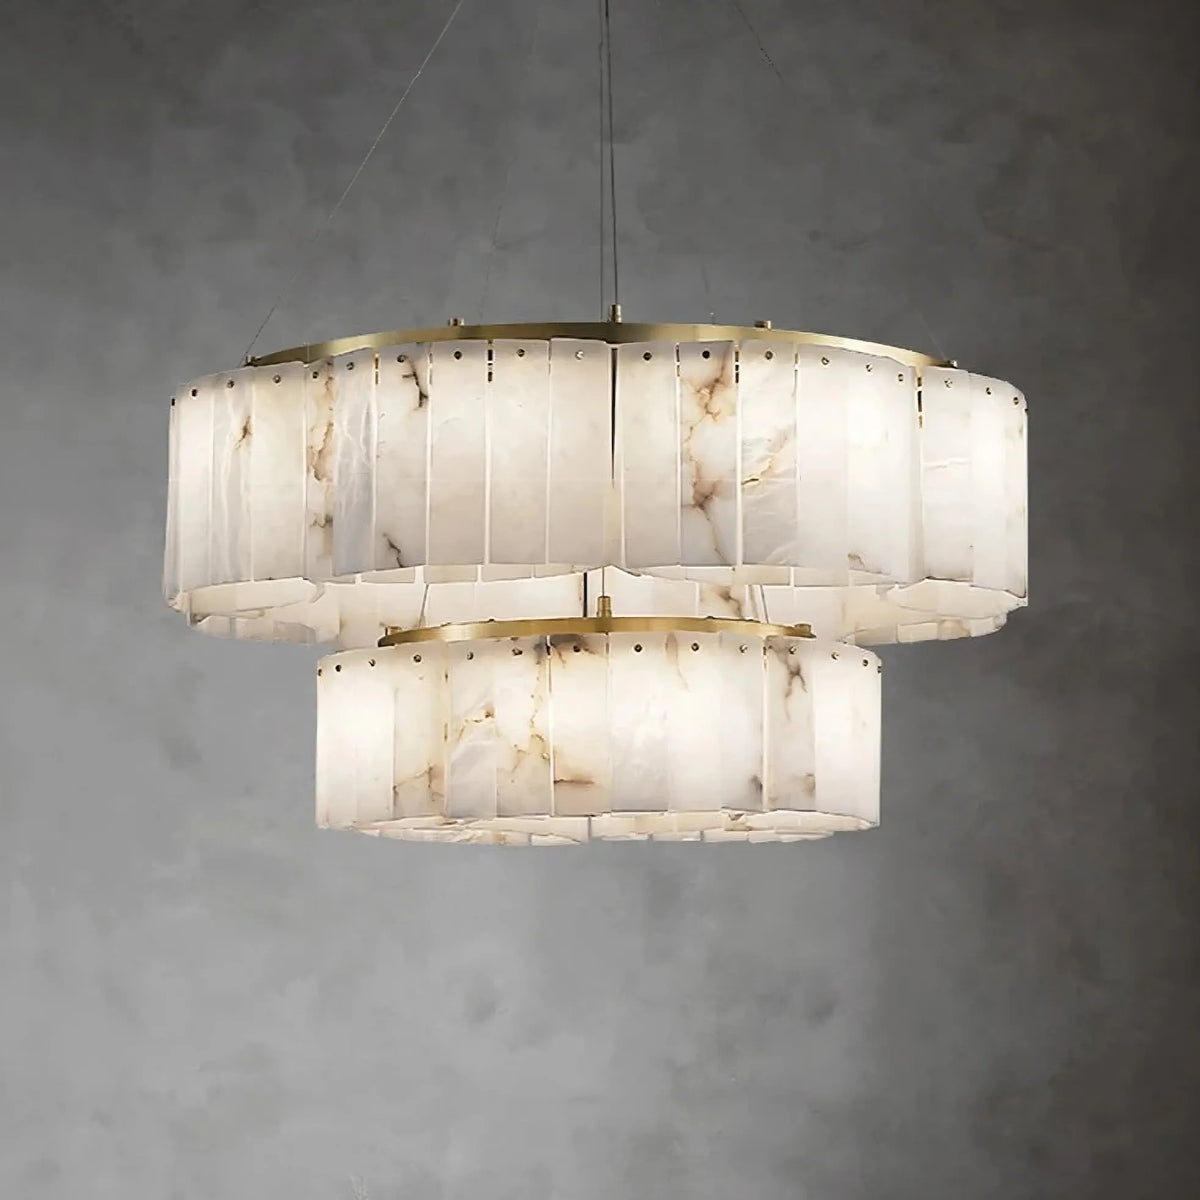 A modern chandelier with dual tiers, showcasing an alabaster and metal design with subtle copper accents. The *2-Tier Natural Marble Modern Chandelier* by *Morsale.com* features two concentric cylindrical lampshades with a natural marble pattern that emits a soft, diffused light against a gray, textured background.